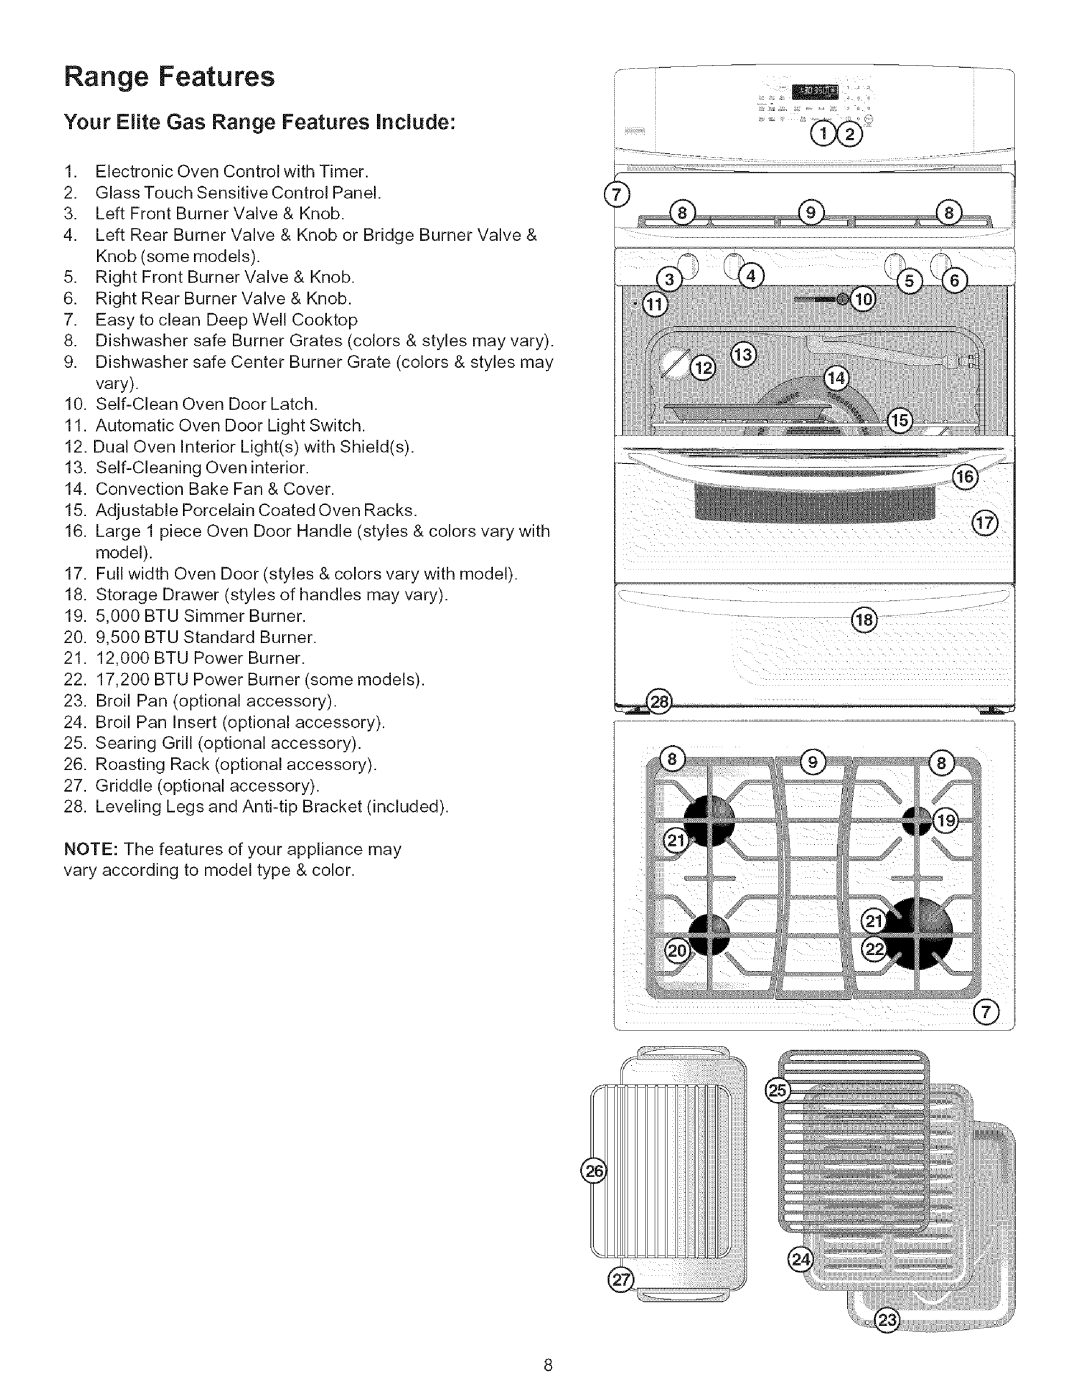 Kenmore 790.7943 manual Your Elite Gas Range Features Include 